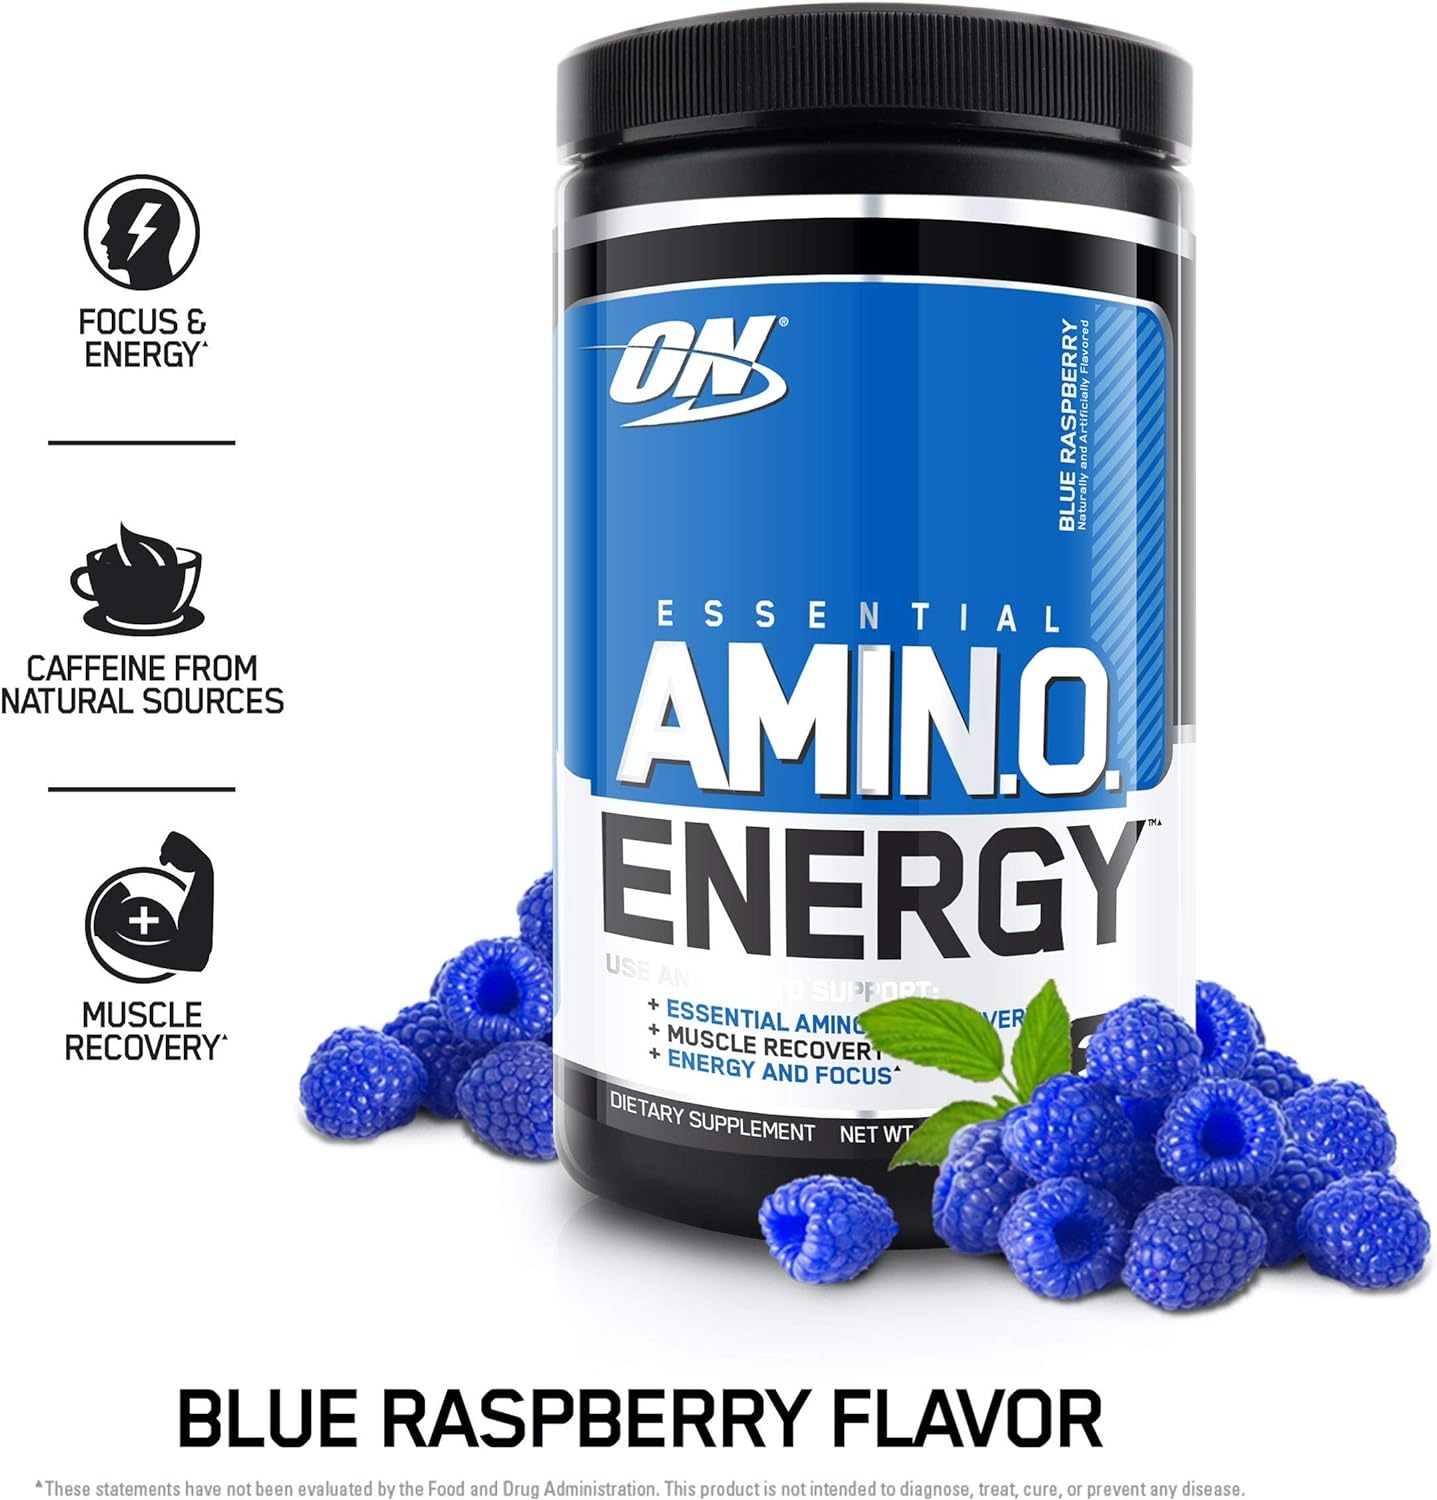 Optimum Nutrition Amino Energy - Pre Workout with Green Tea, BCAA, Amino Acids, Keto Friendly, Green Coffee Extract, Energy Powder - Blue Raspberry, 30 Servings